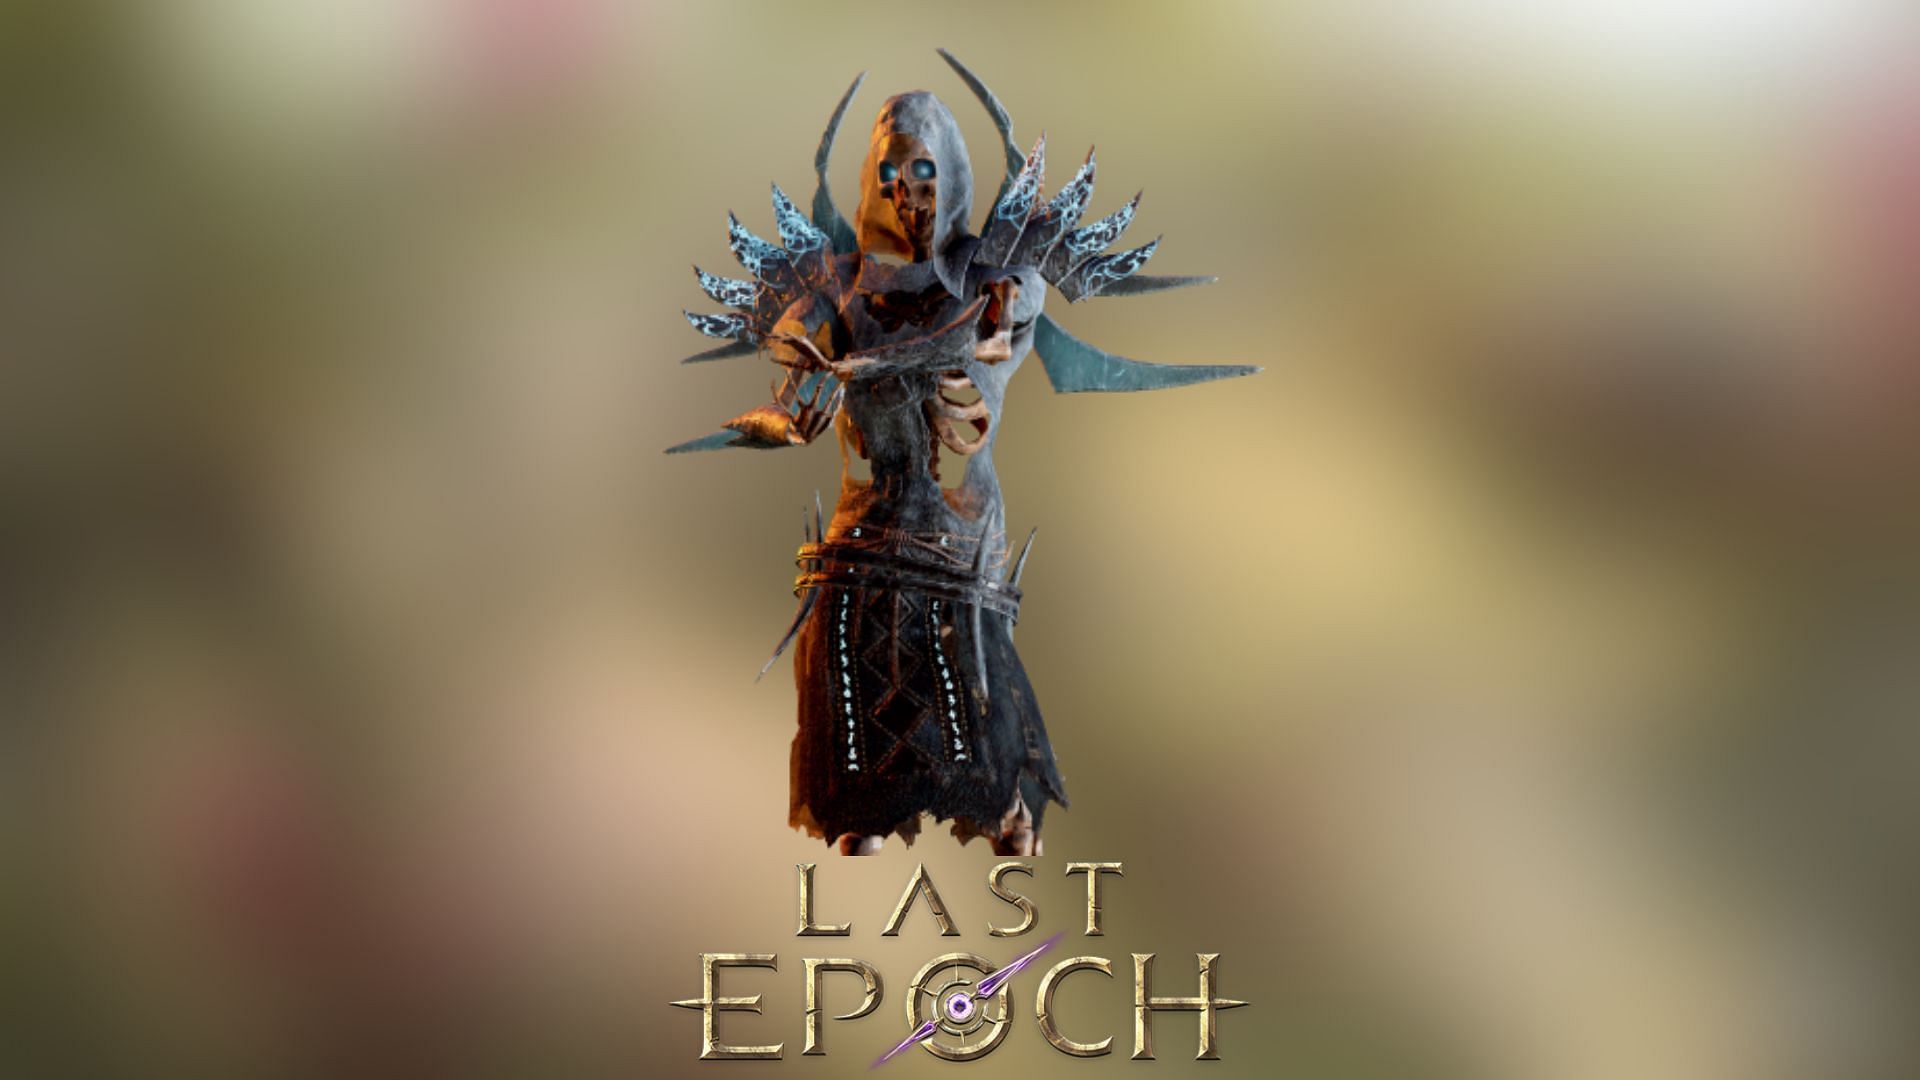 You can obtain the Frostbite Shackles by defeating Formosus the Undying in Last Epoch (Image via Eleventh Hour Games)